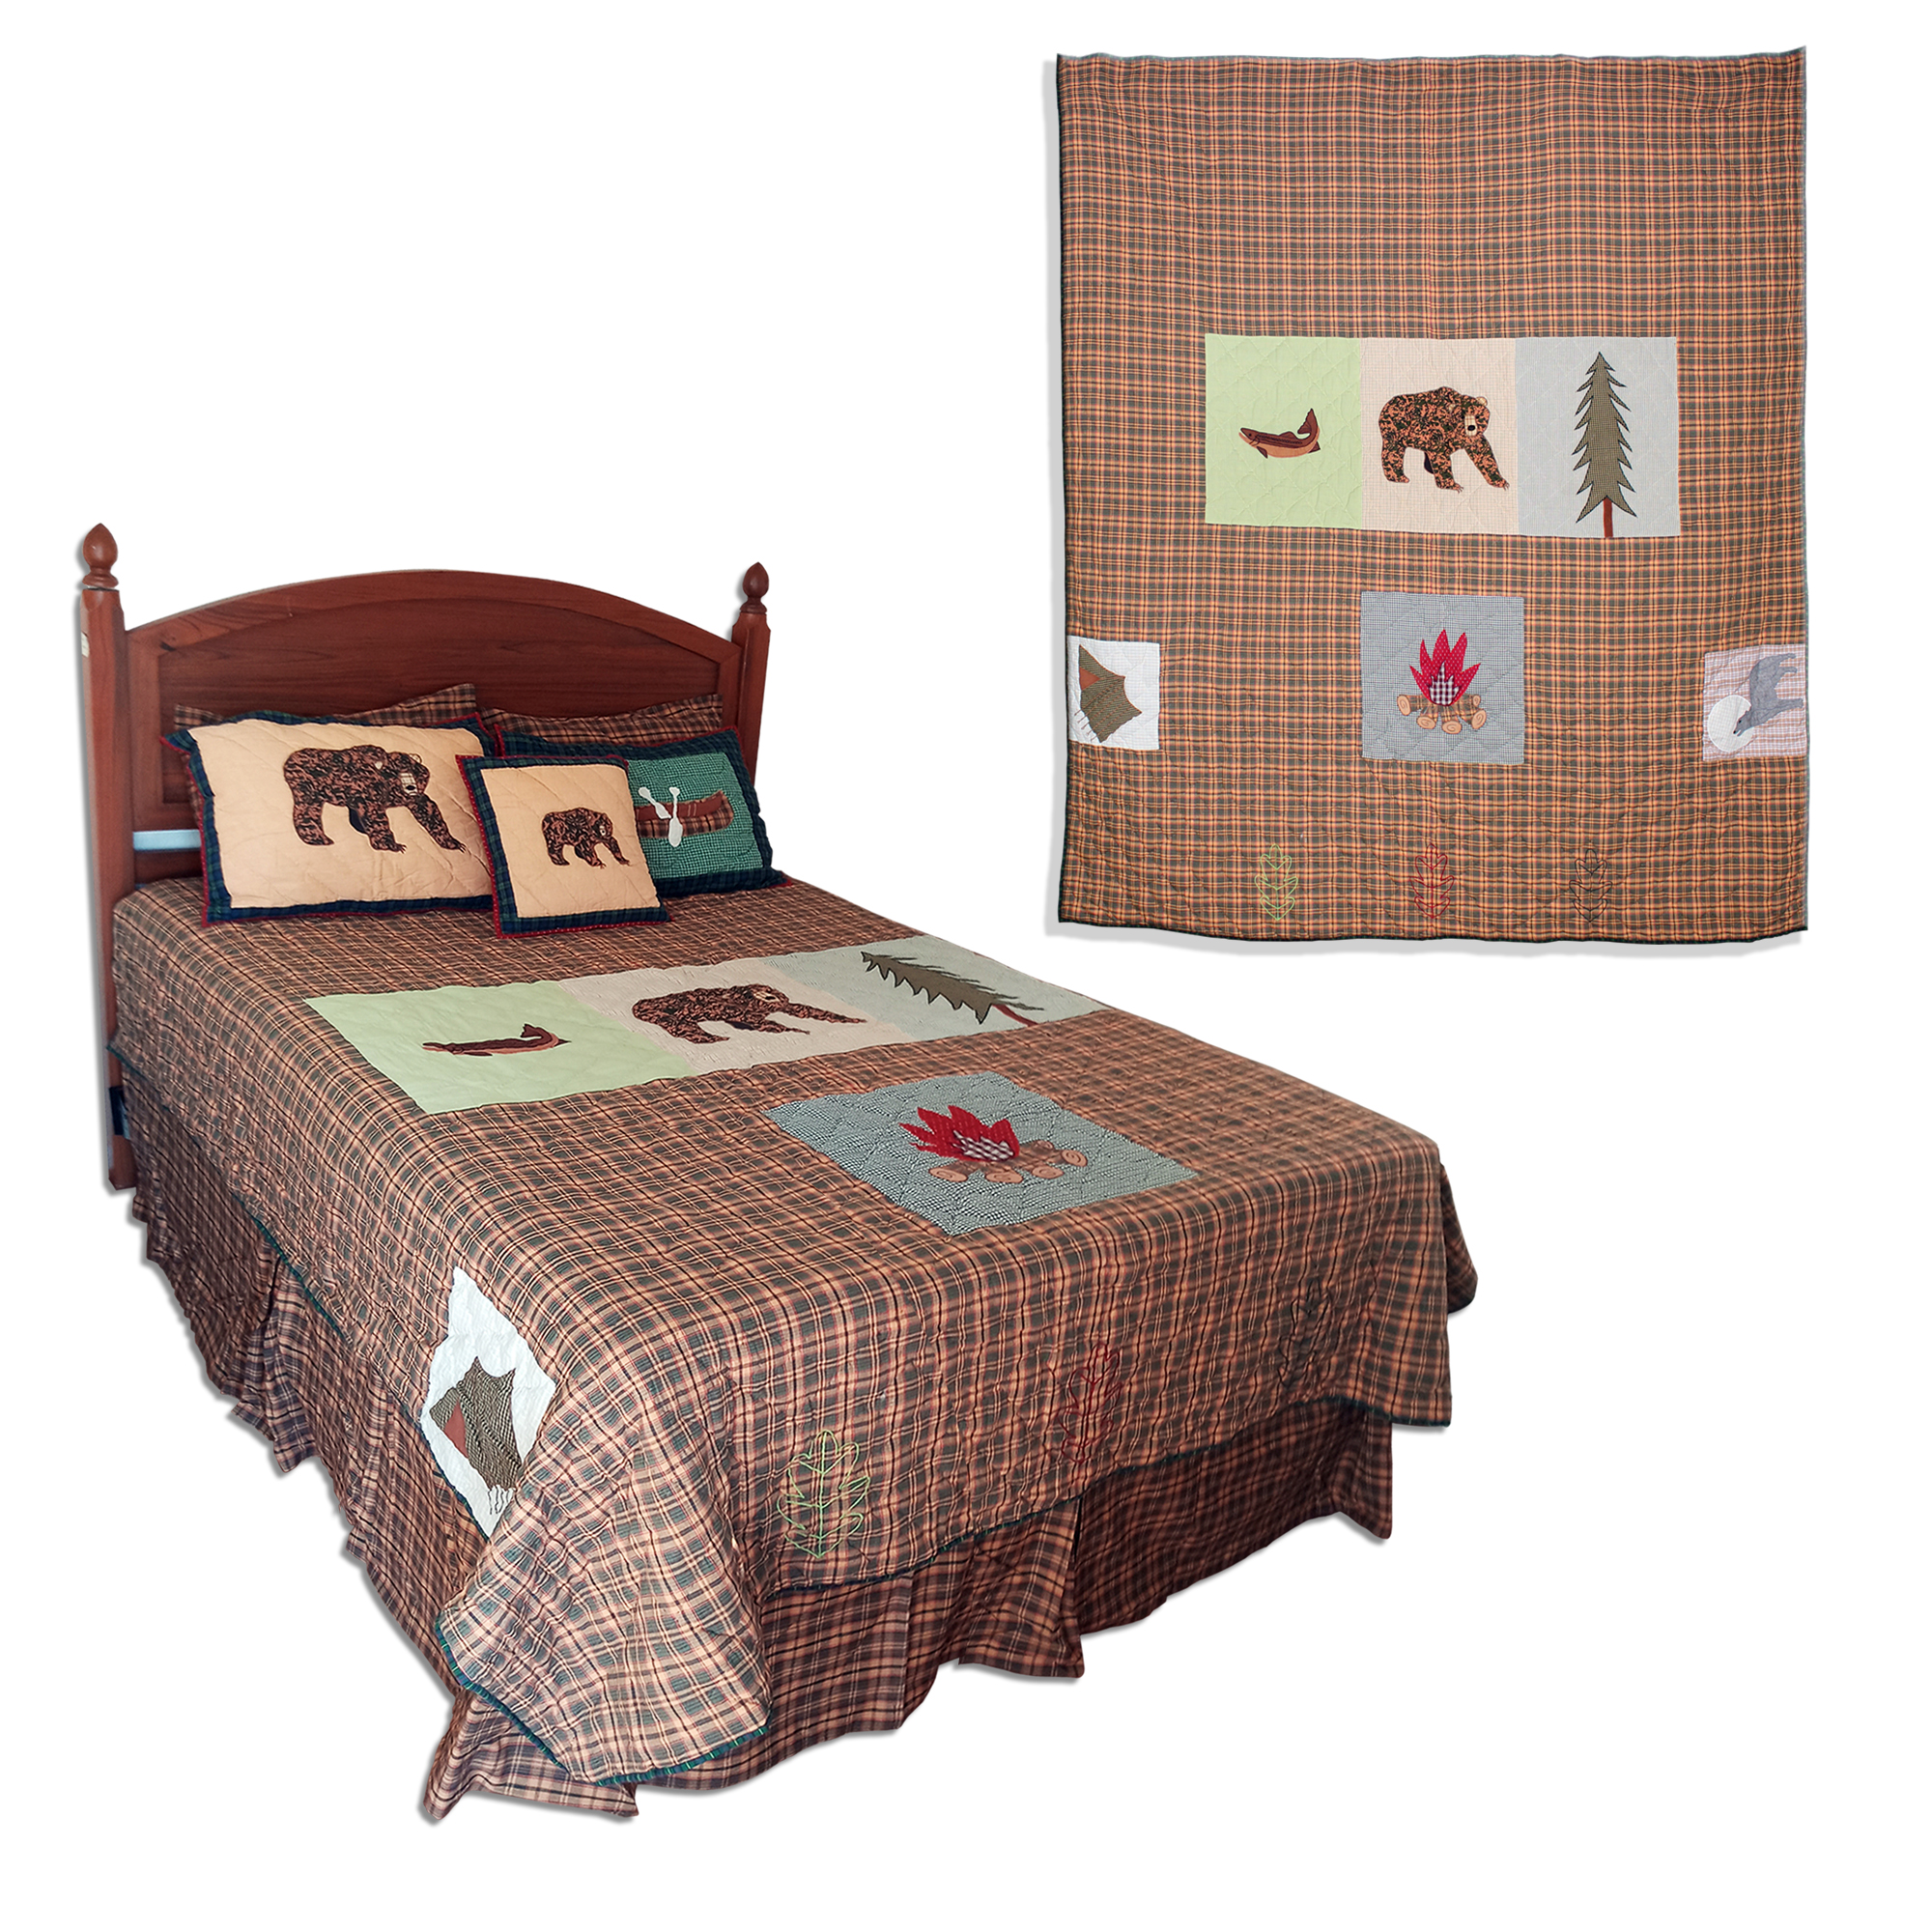 Backwoods Trek, Gold and Brown Plaid King Quilt 105"W x 95"L